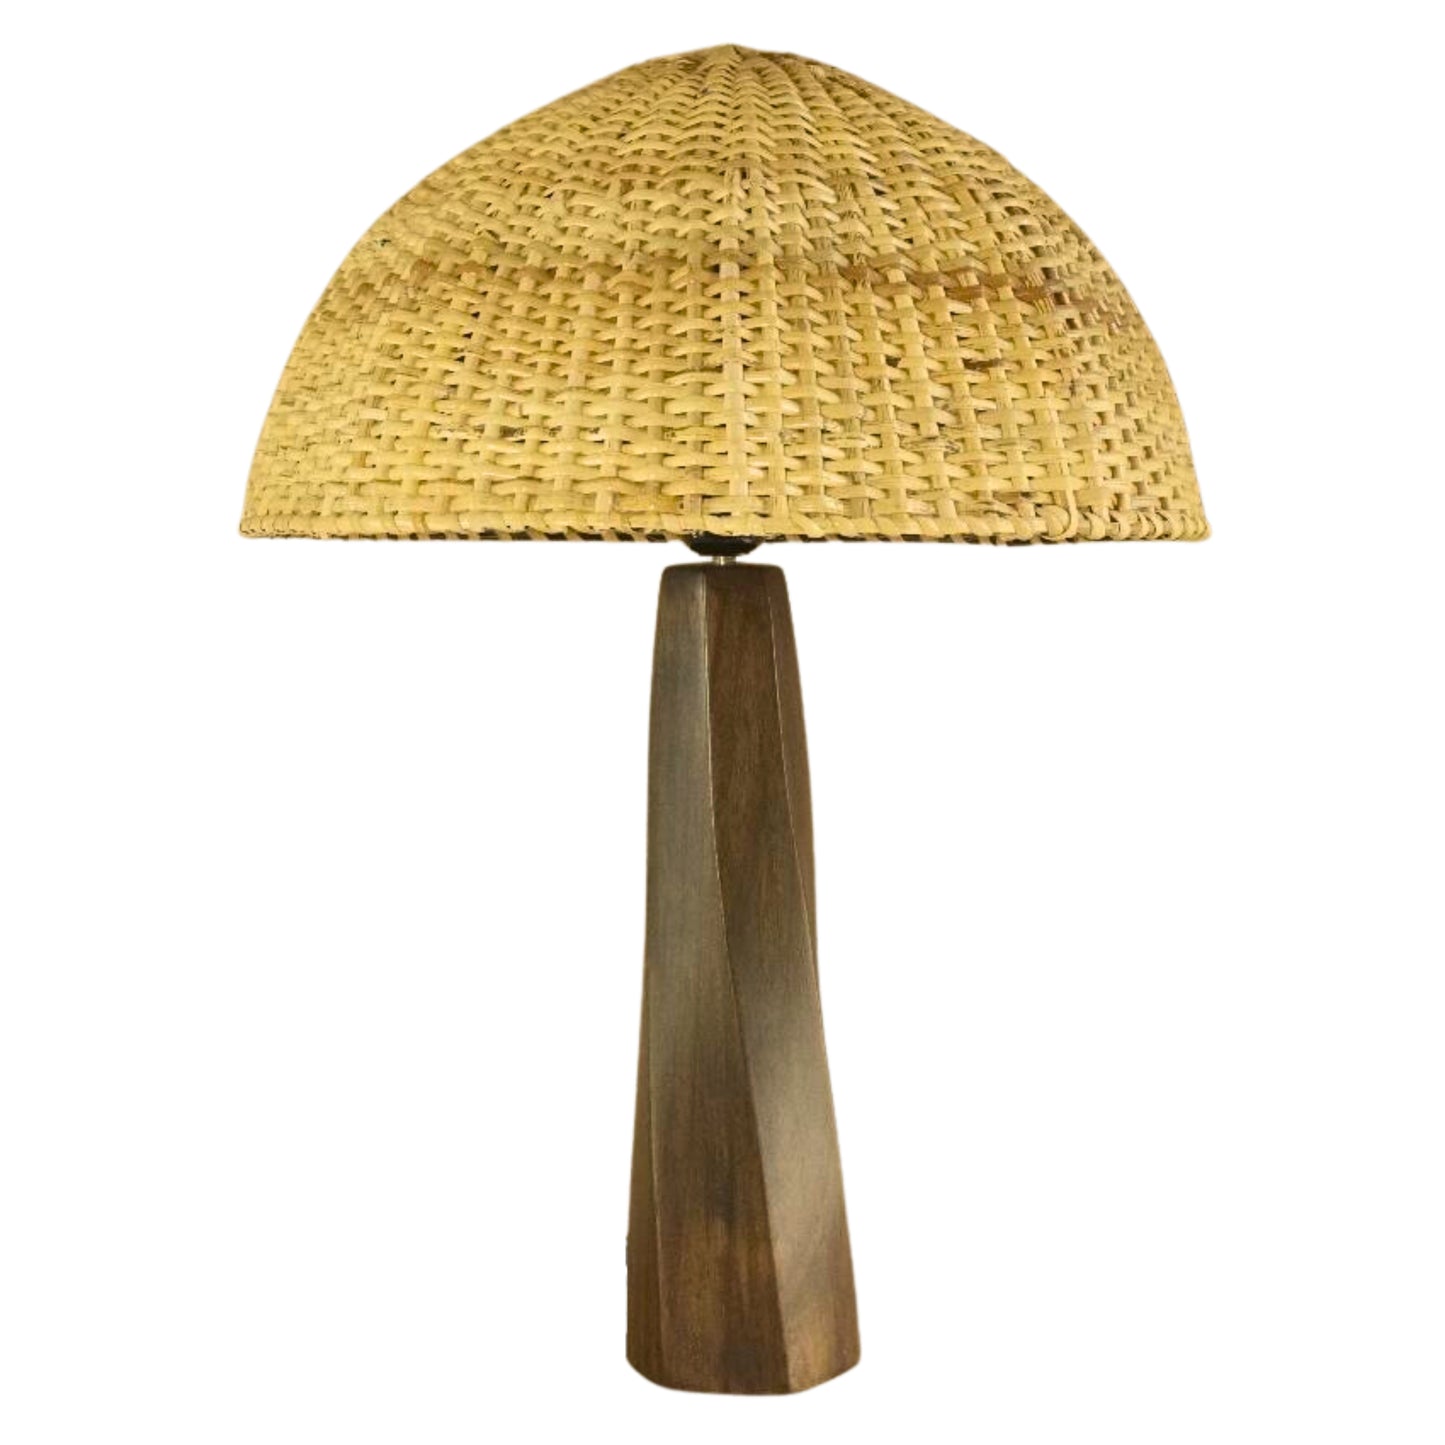 Obelisk Wooden Lamp With Cane Shade